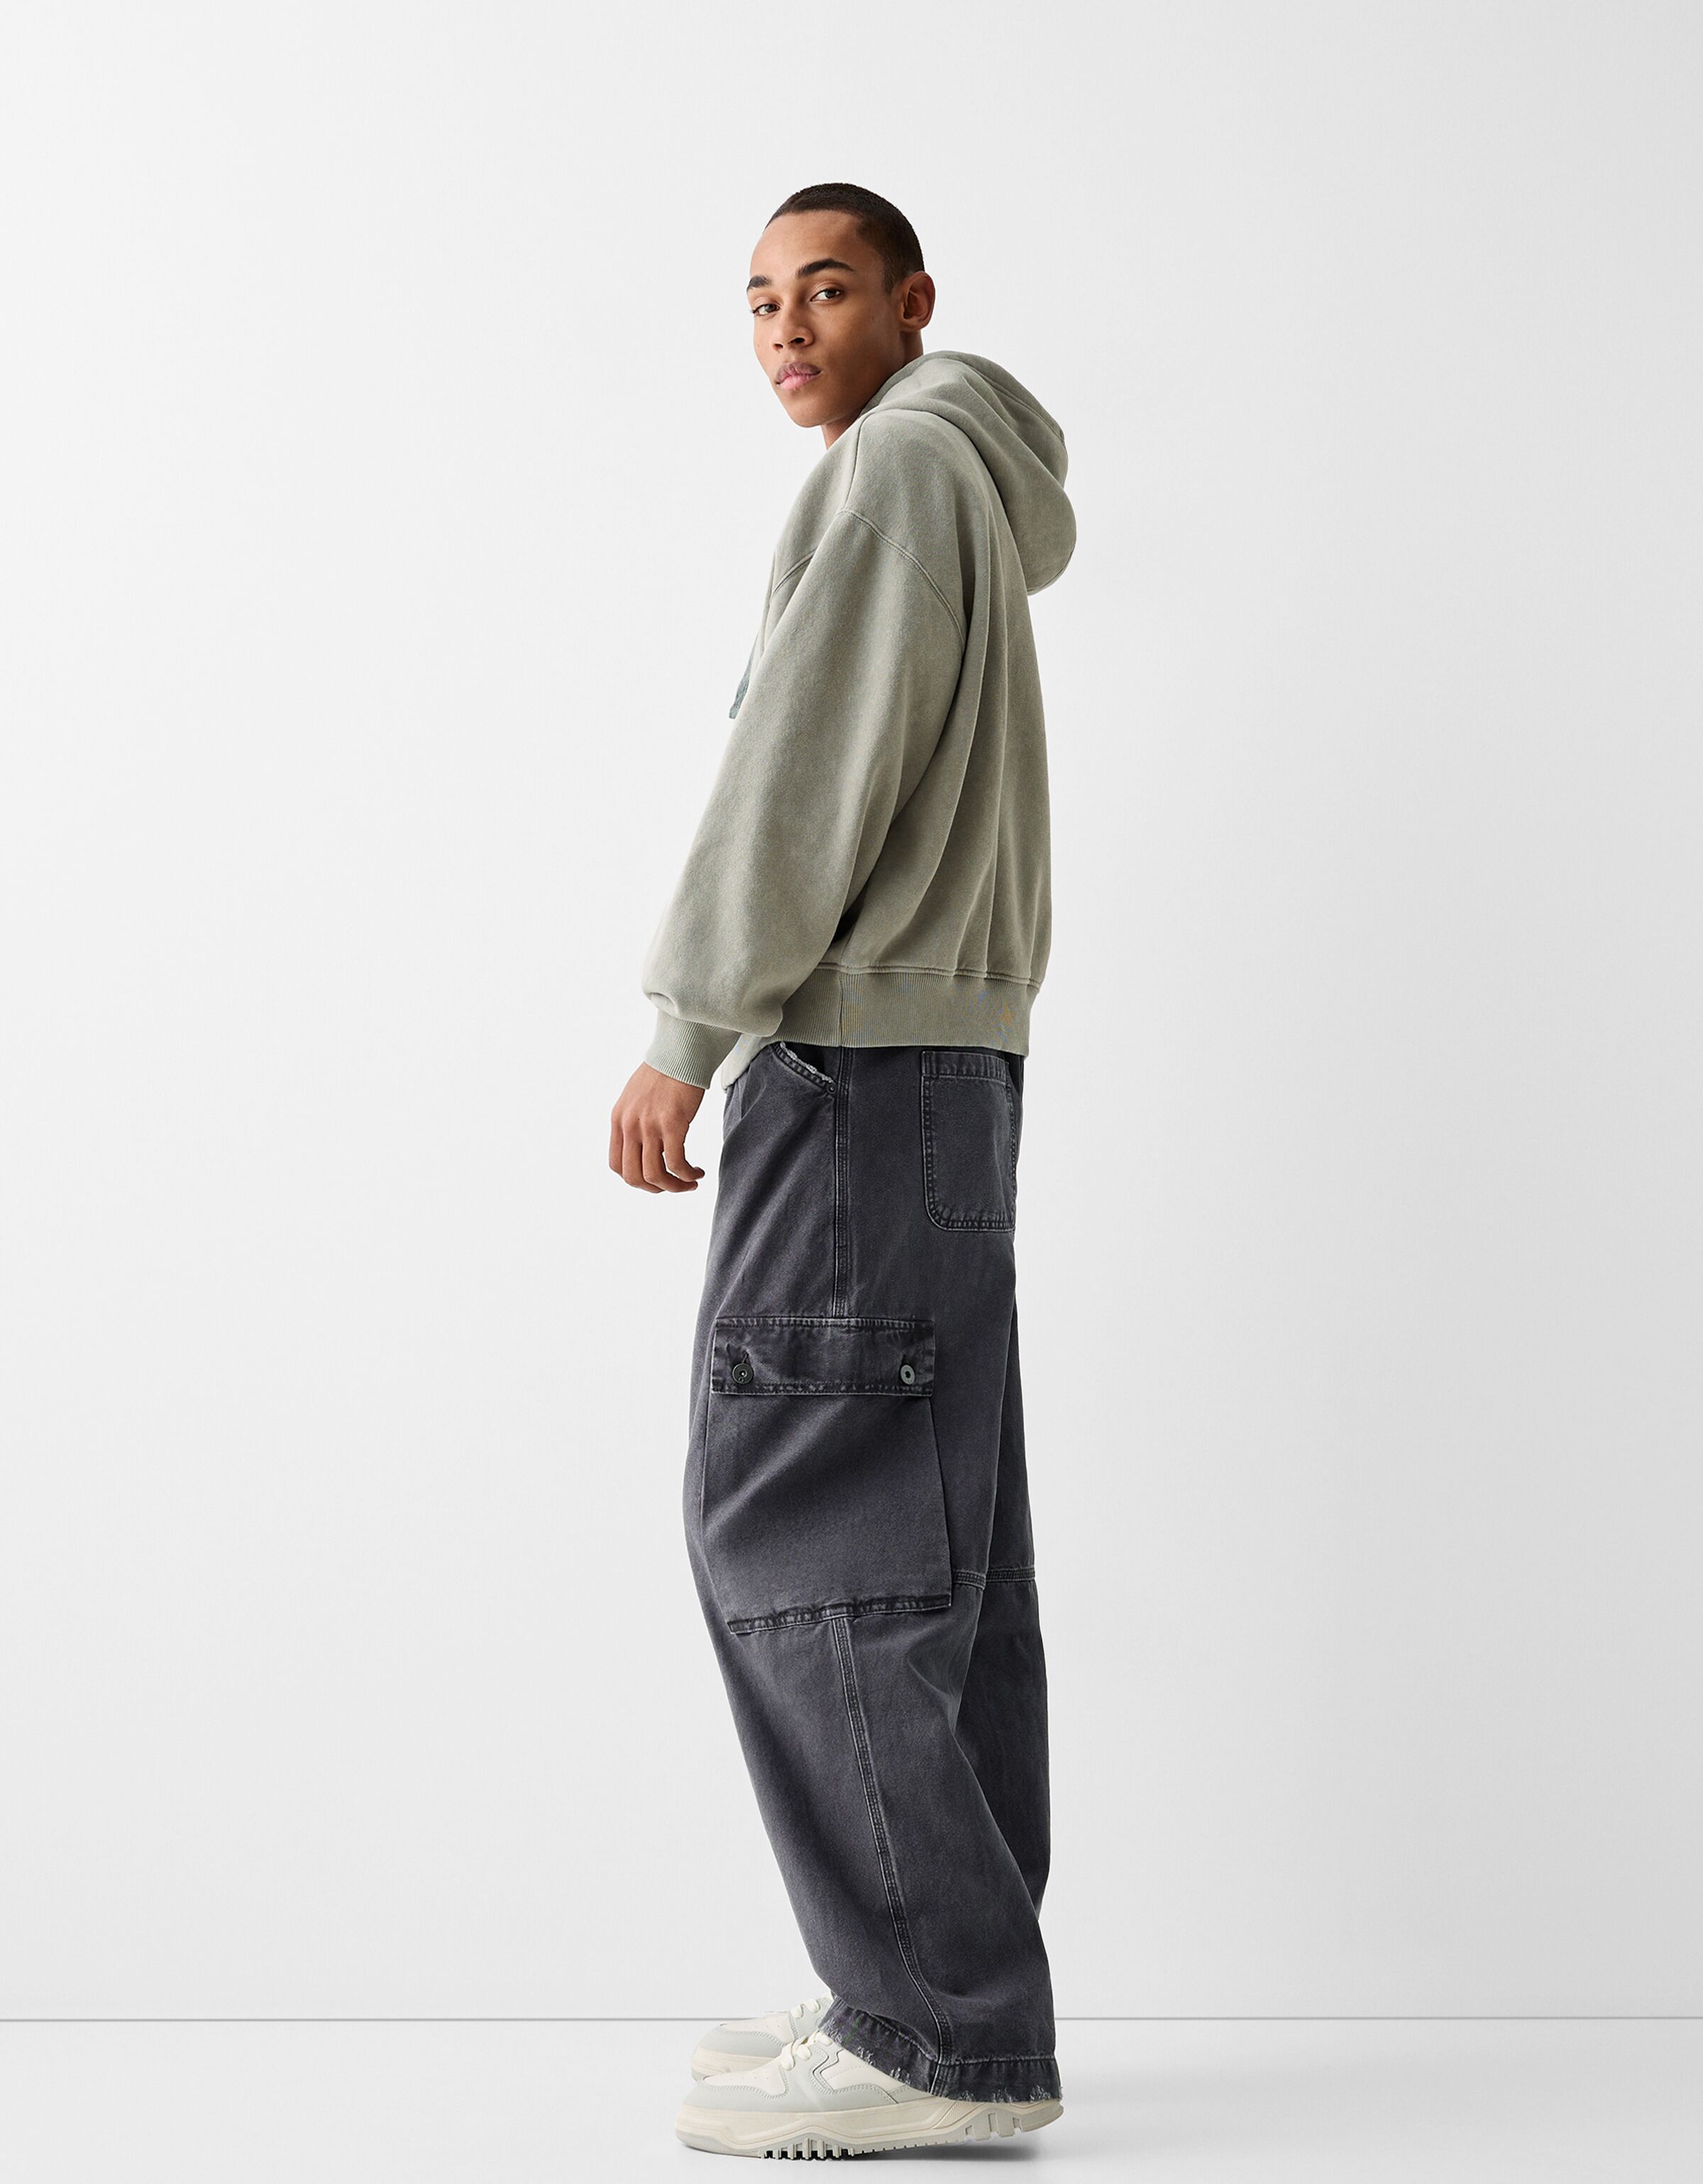 Uskees pants | workwear and drawstring pants in classic fits